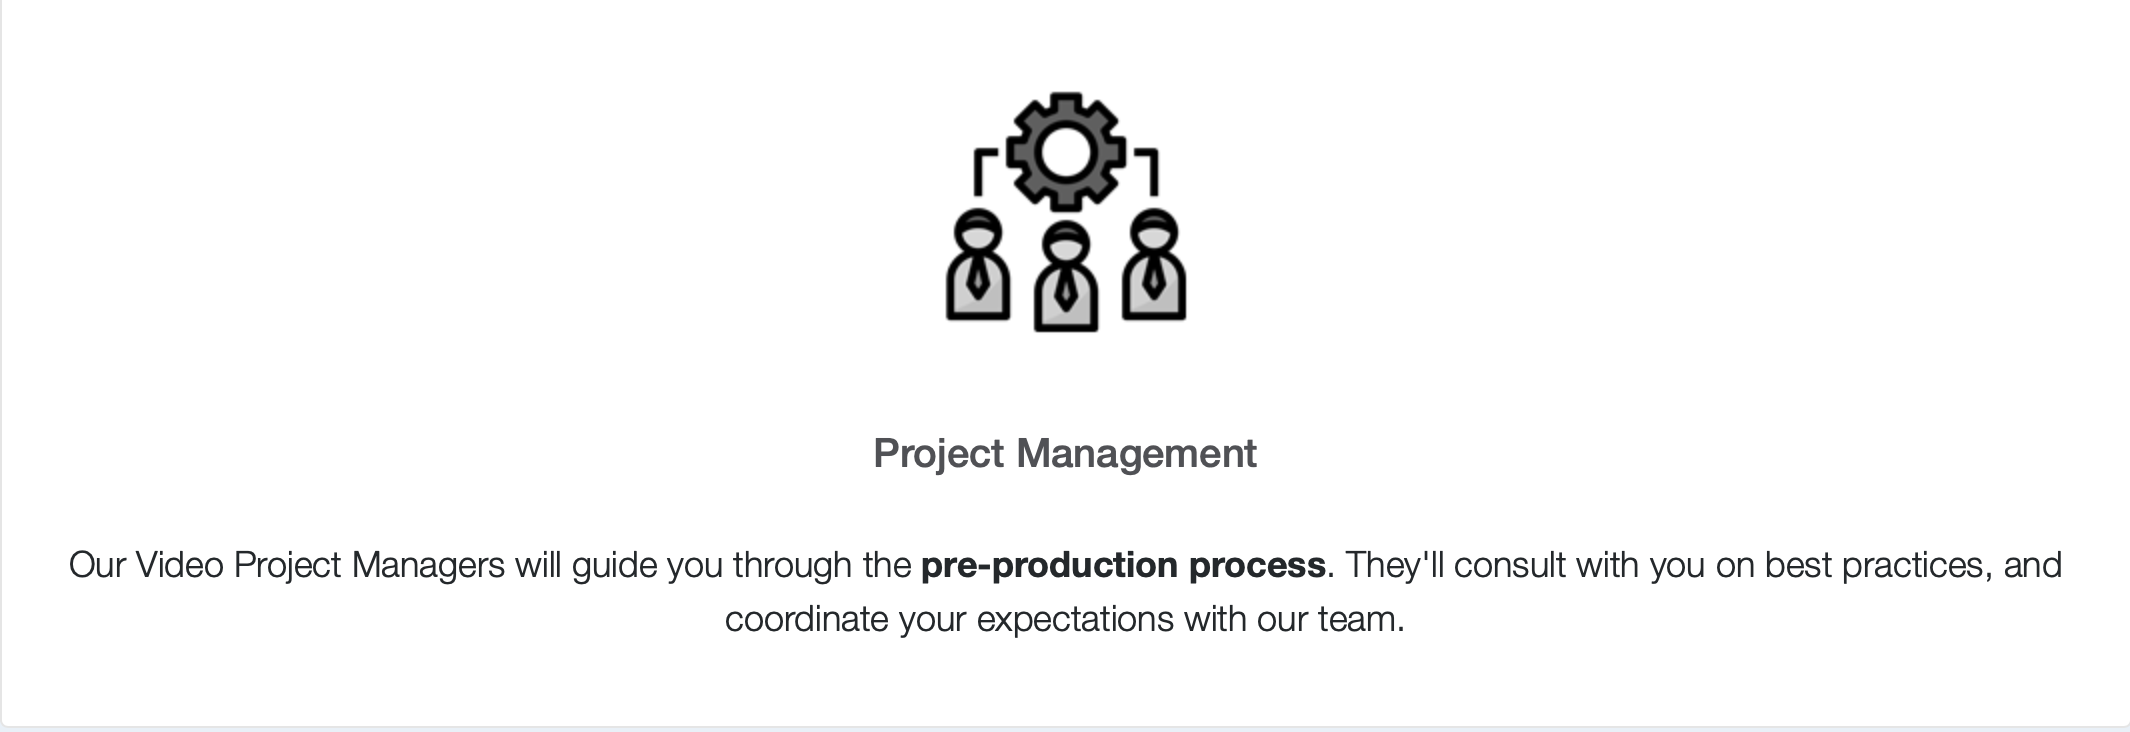 Our Video Project Managers will guide you through the pre-production process. They'll consult with you on best practices, and coordinate your expectations with our team. 